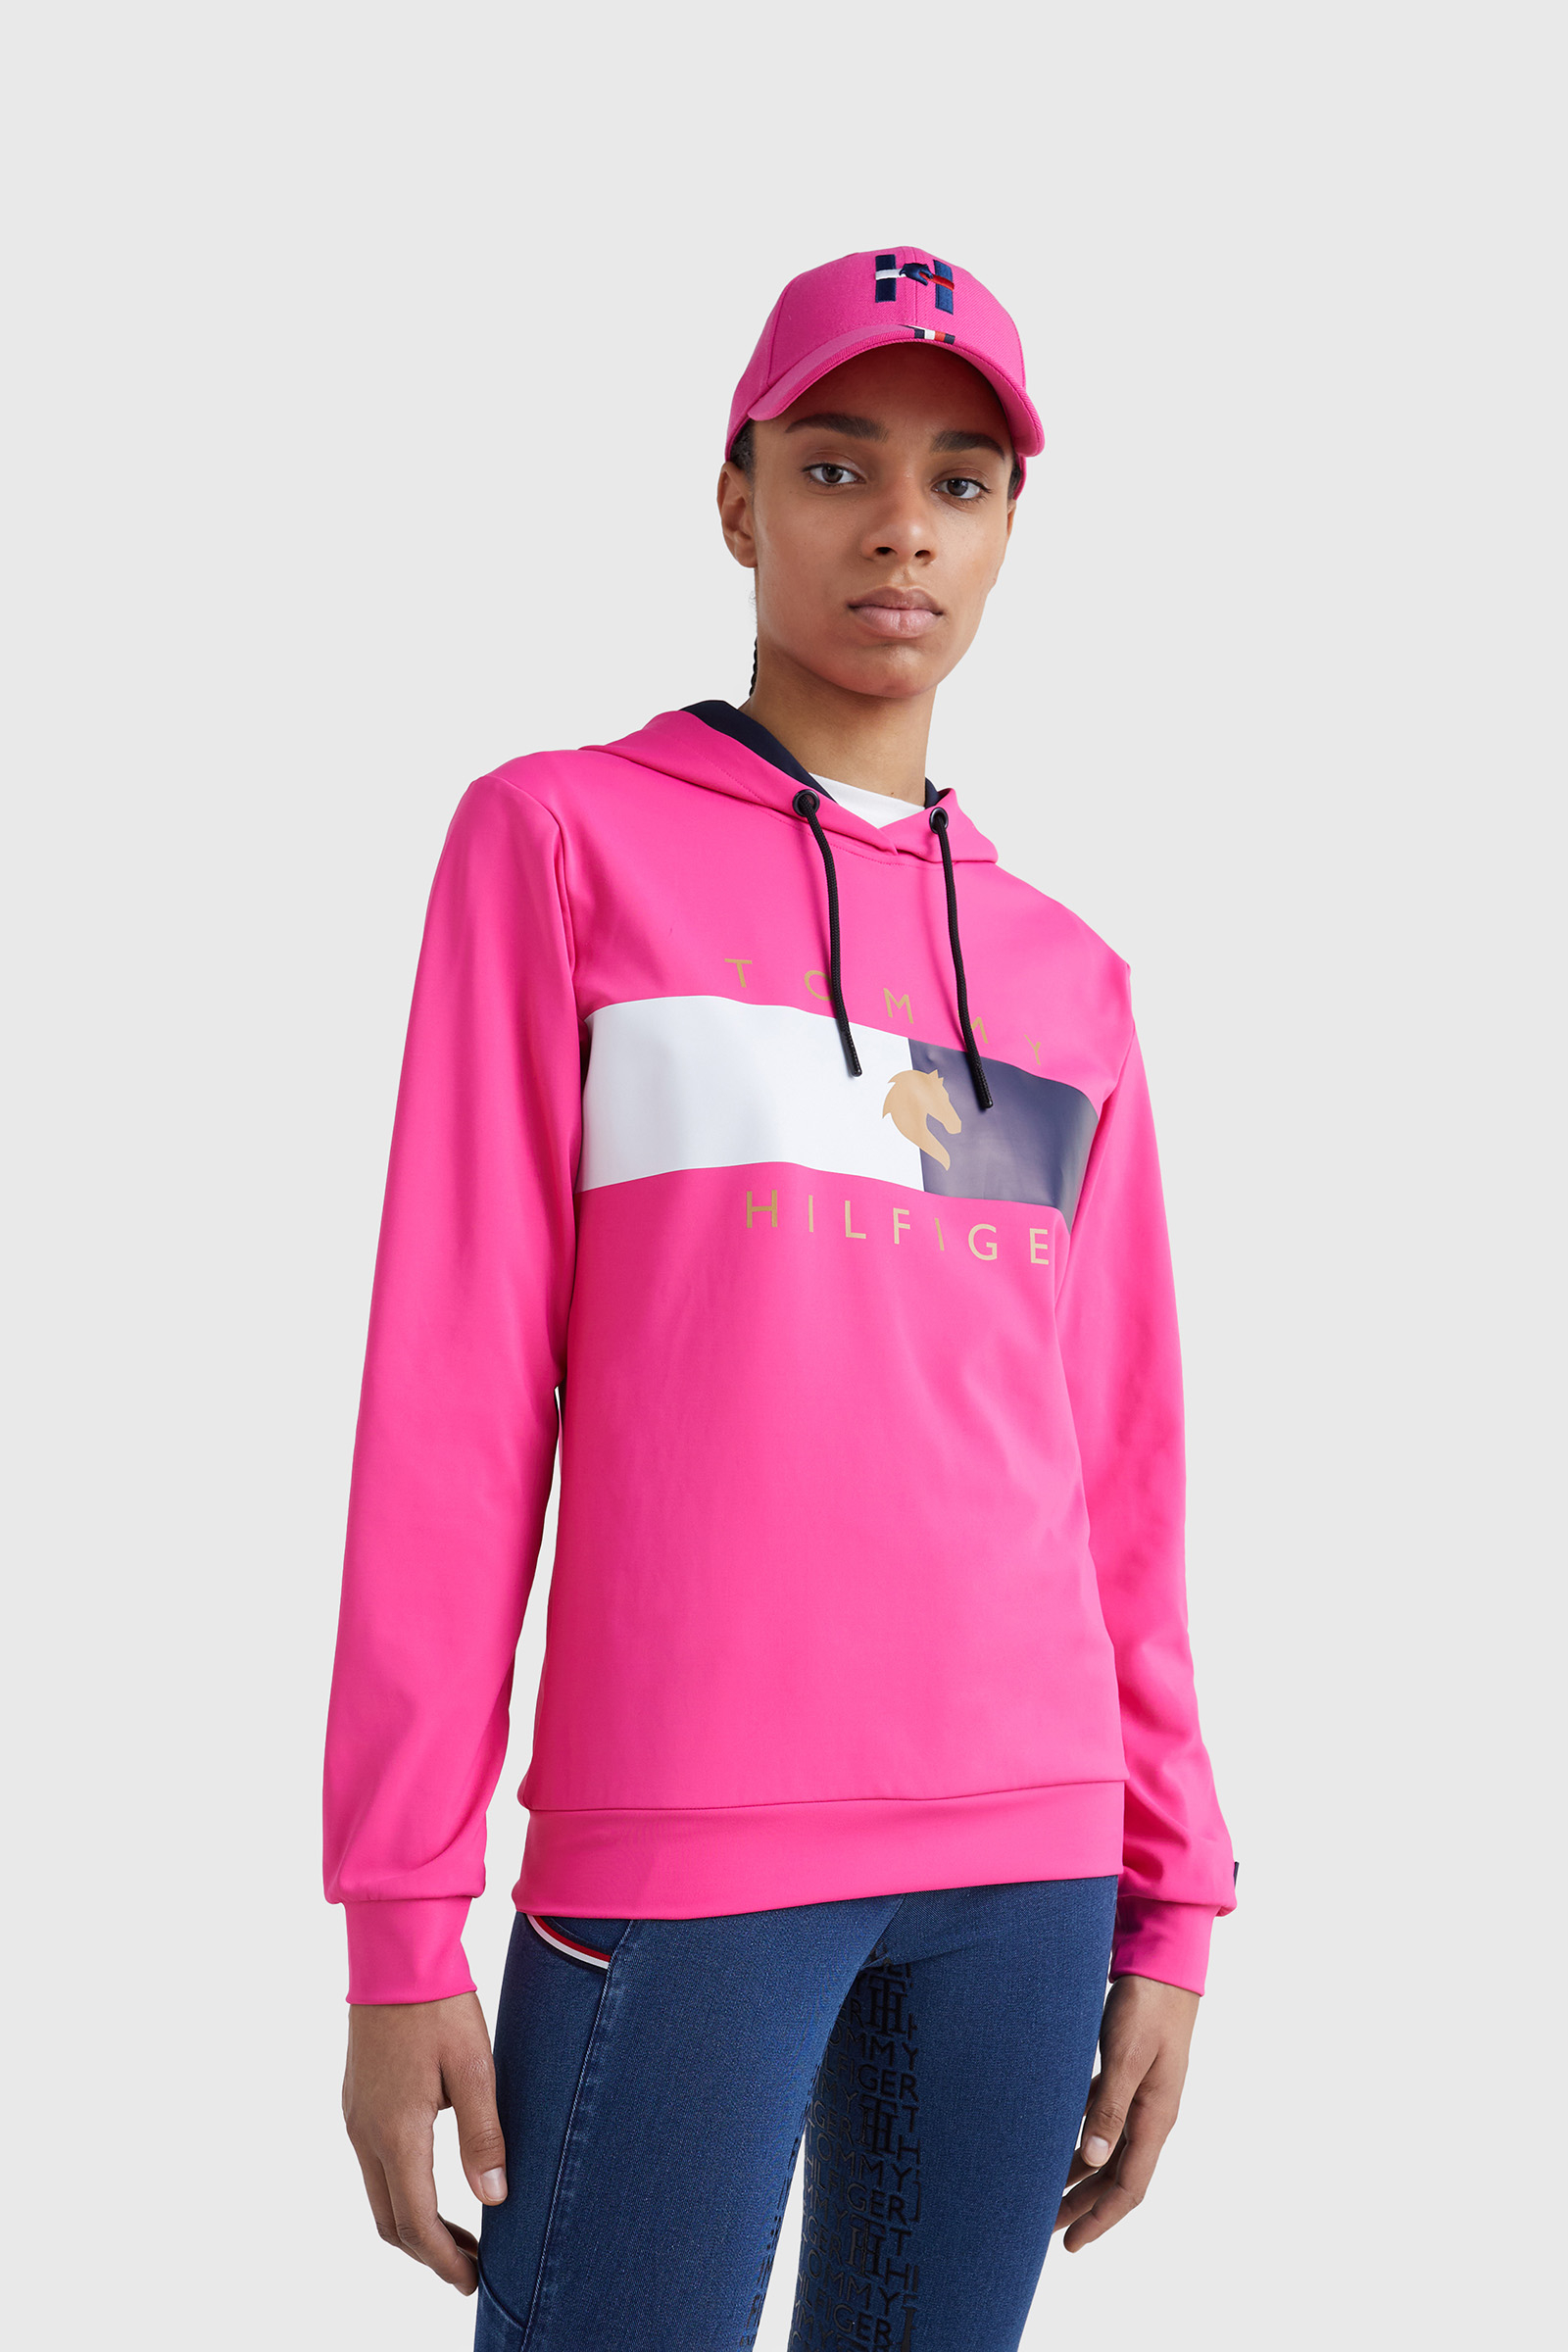 Tommy Hilfiger REGULAR HOODIE Pink - Free delivery  Spartoo NET ! -  Clothing sweaters Women USD/$87.20